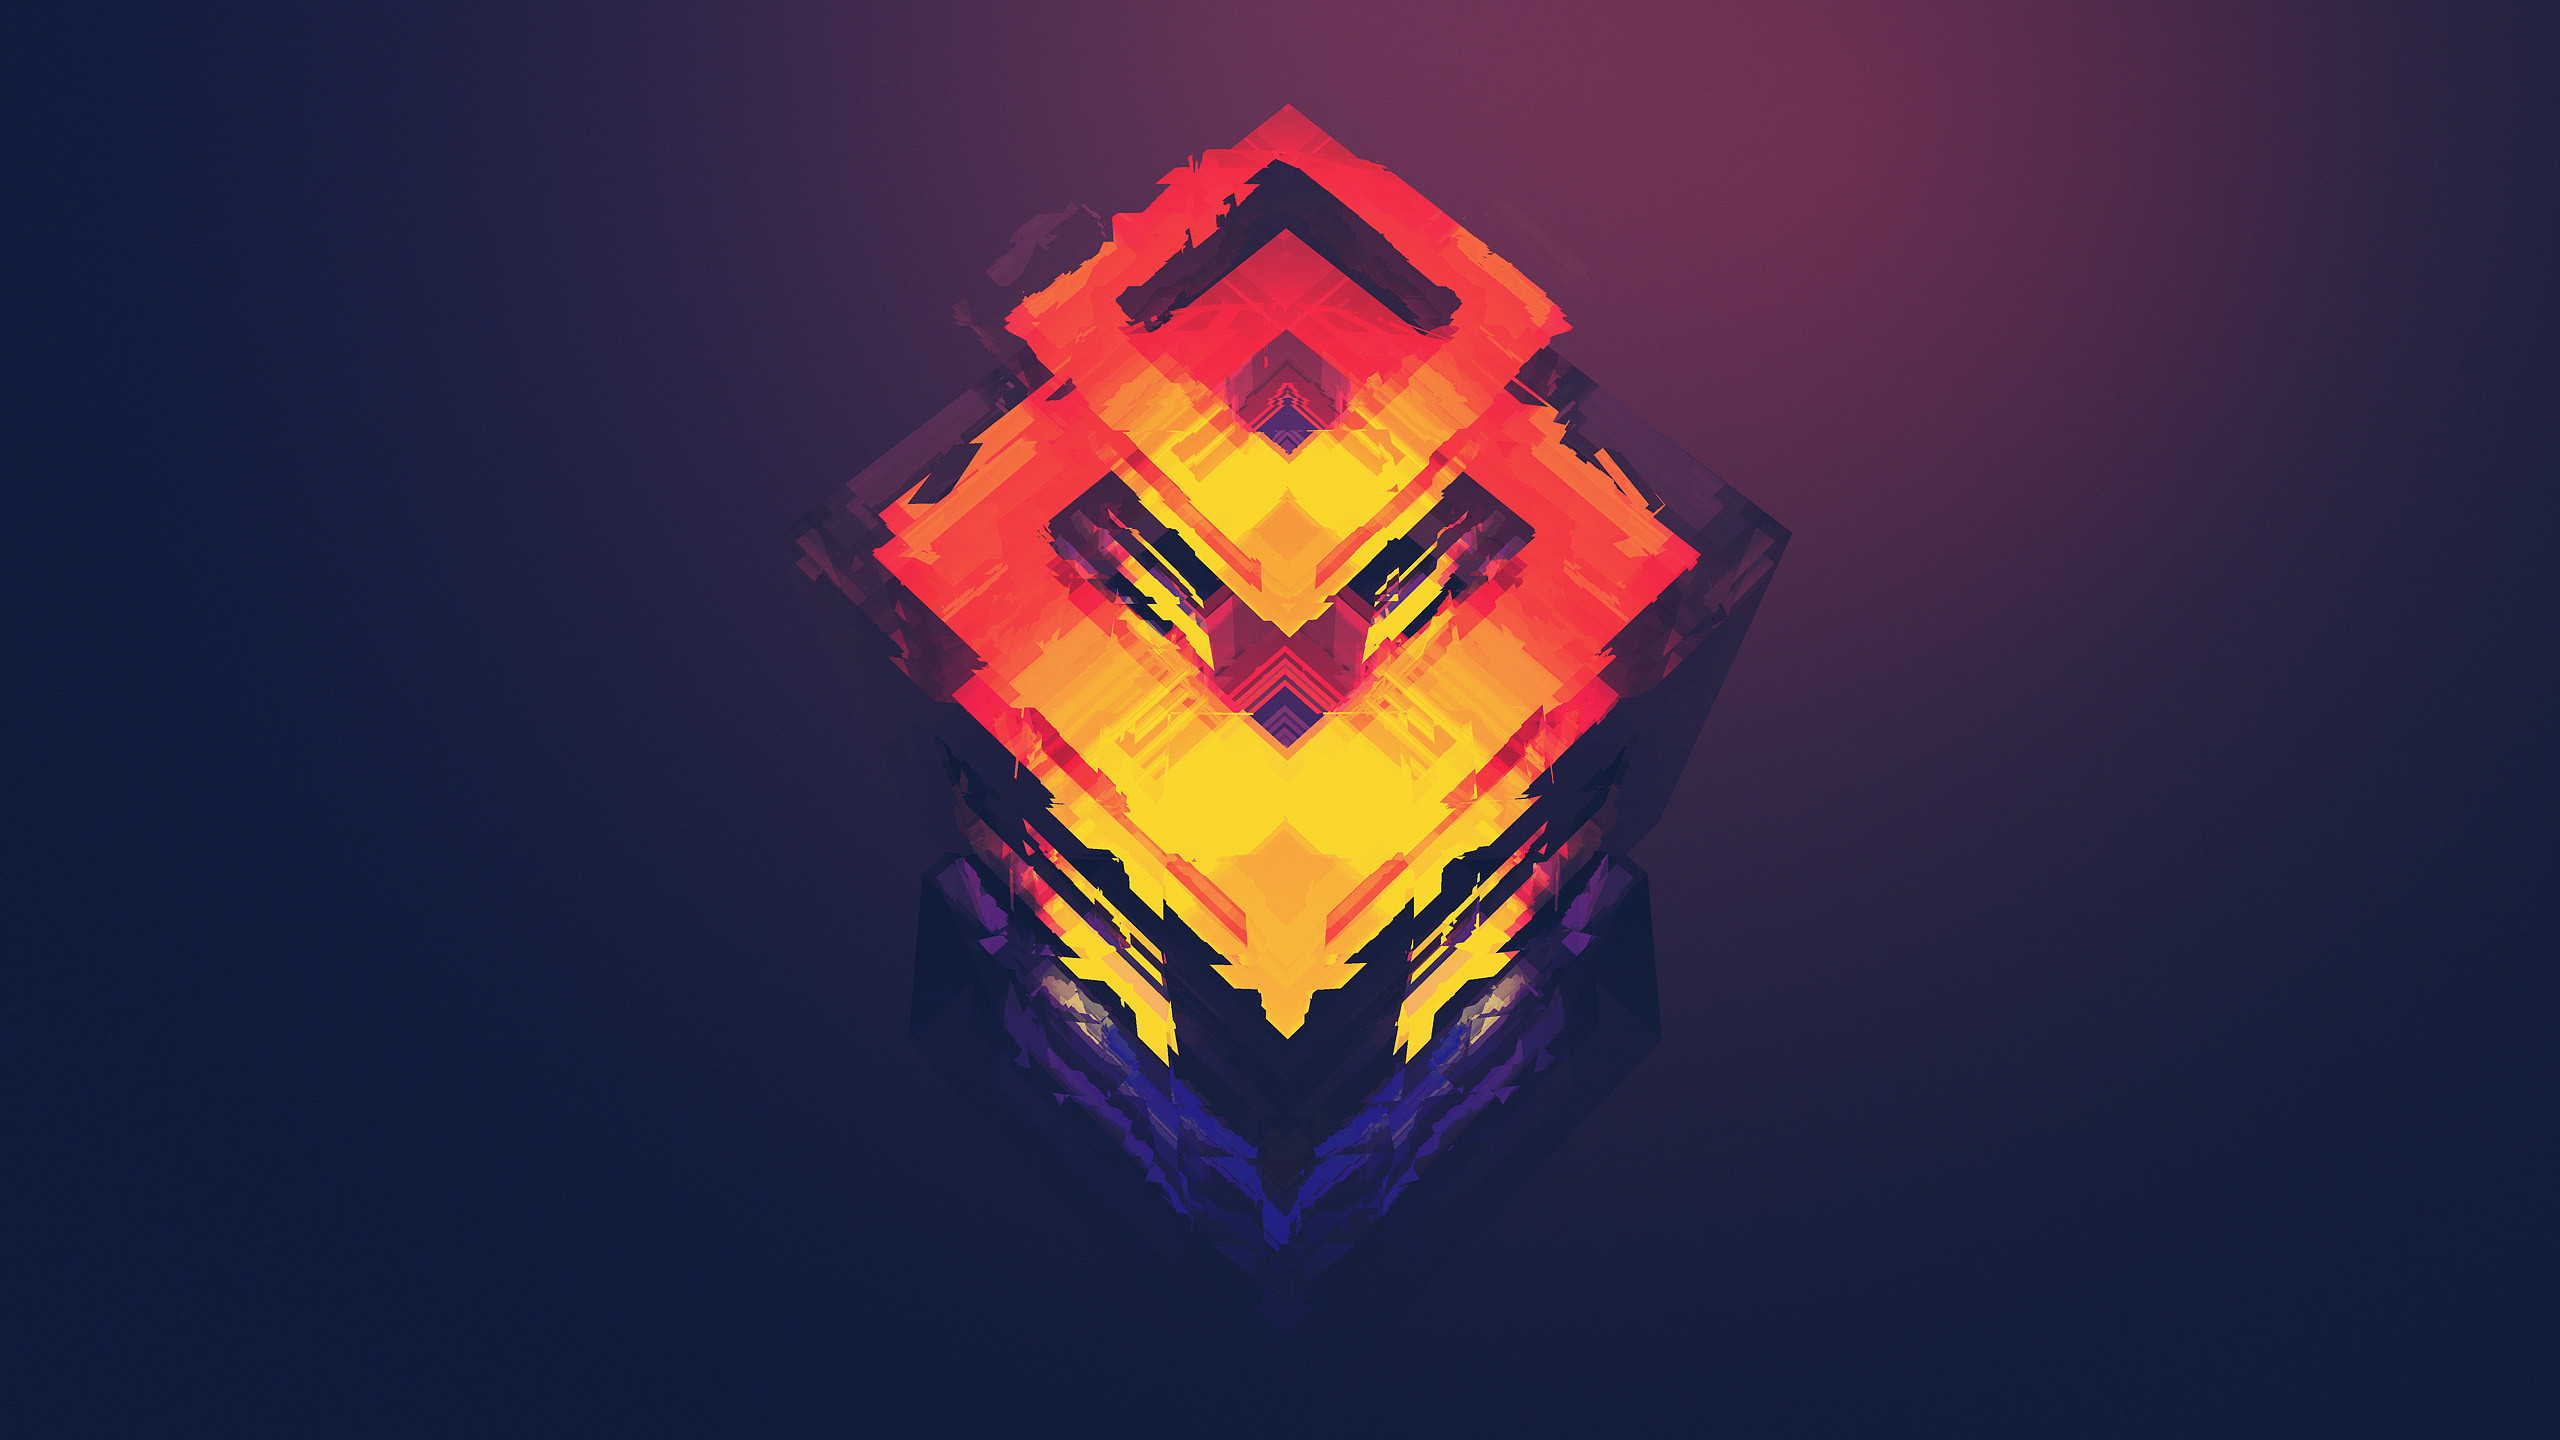 2560x1440 wallpaper, colorful shapes, colors, design by Justin Maller FACET.